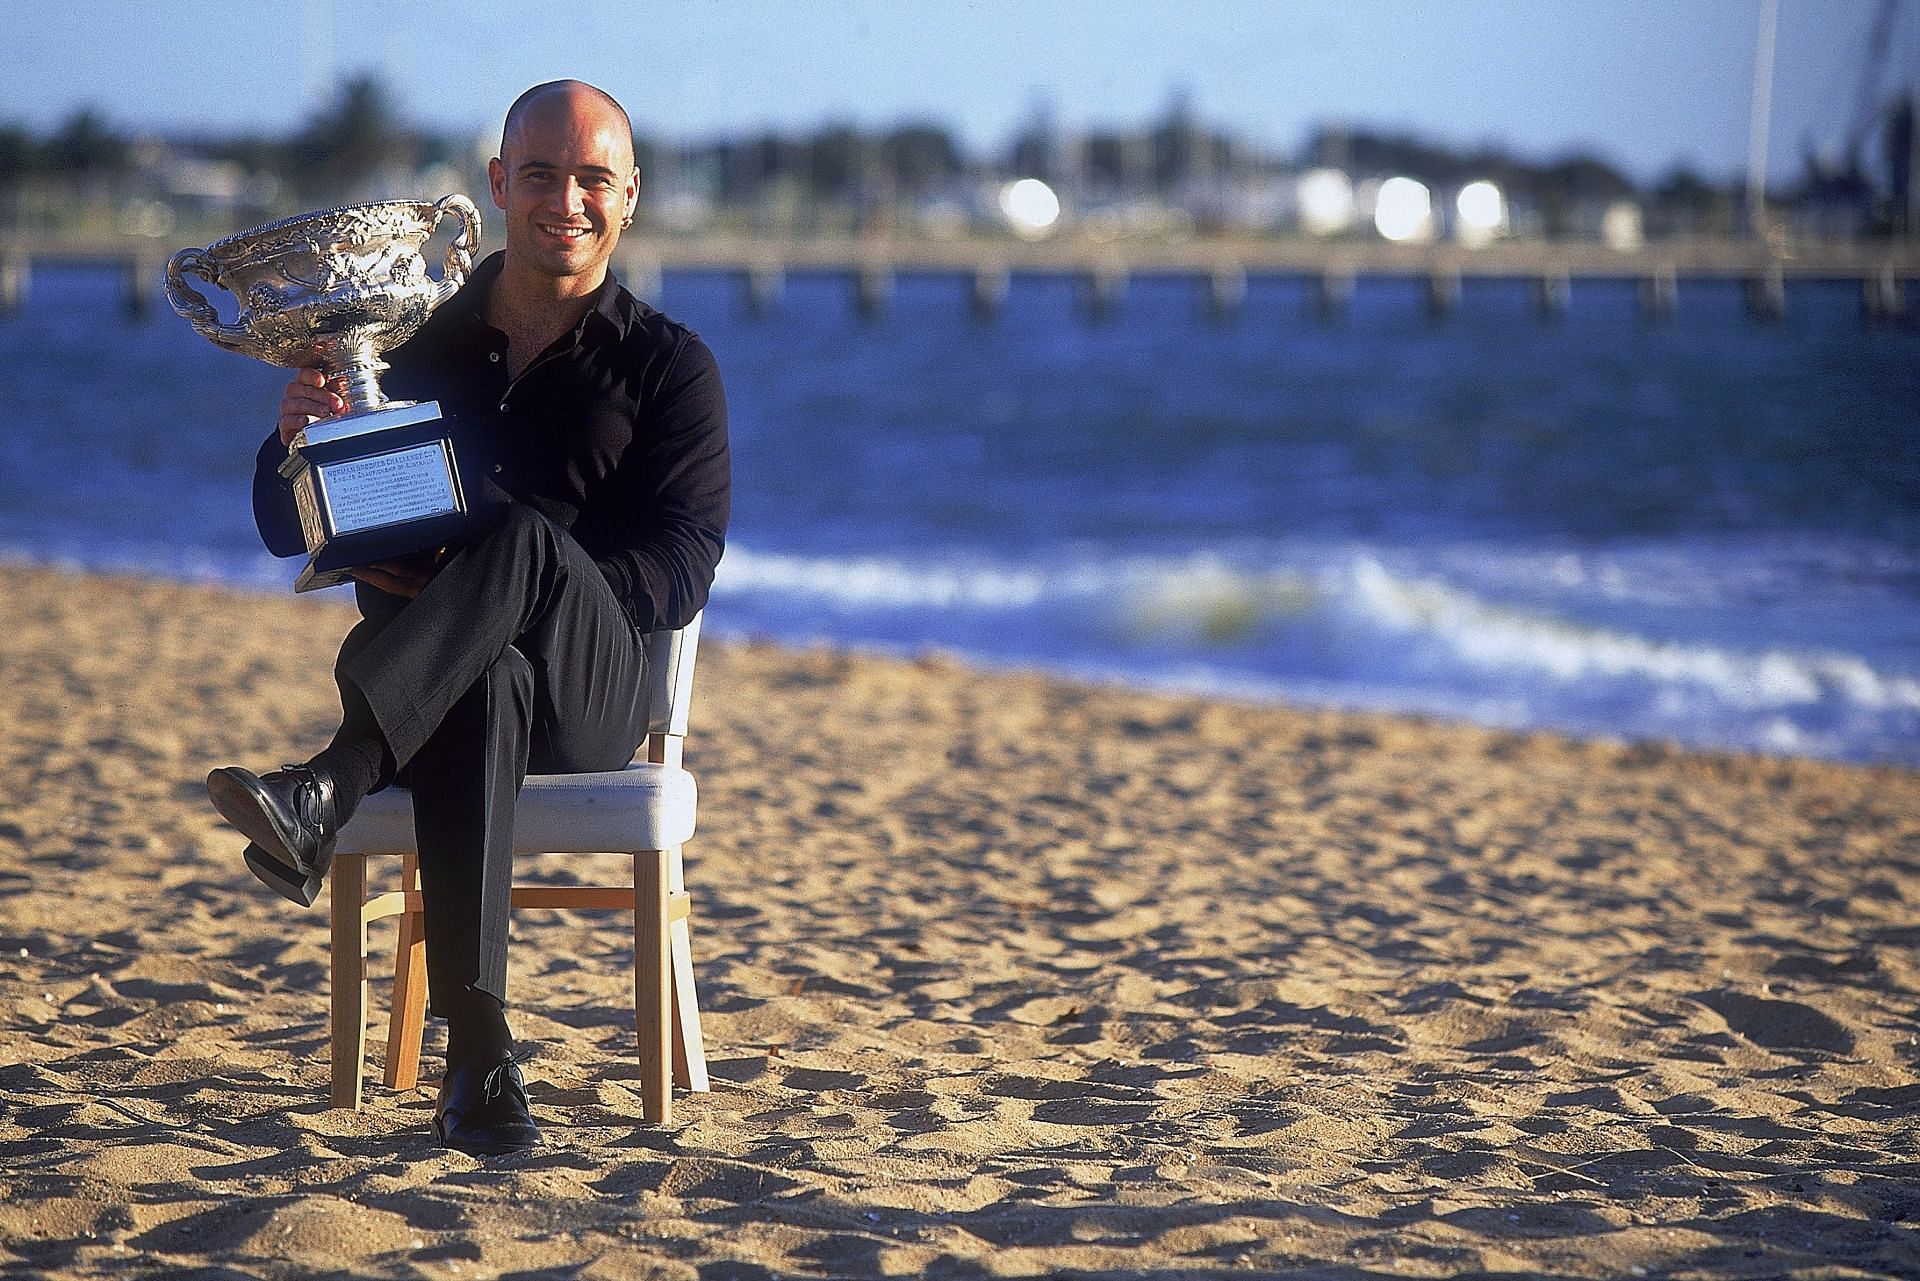 Andre Agassi won the 2001 Australian Open